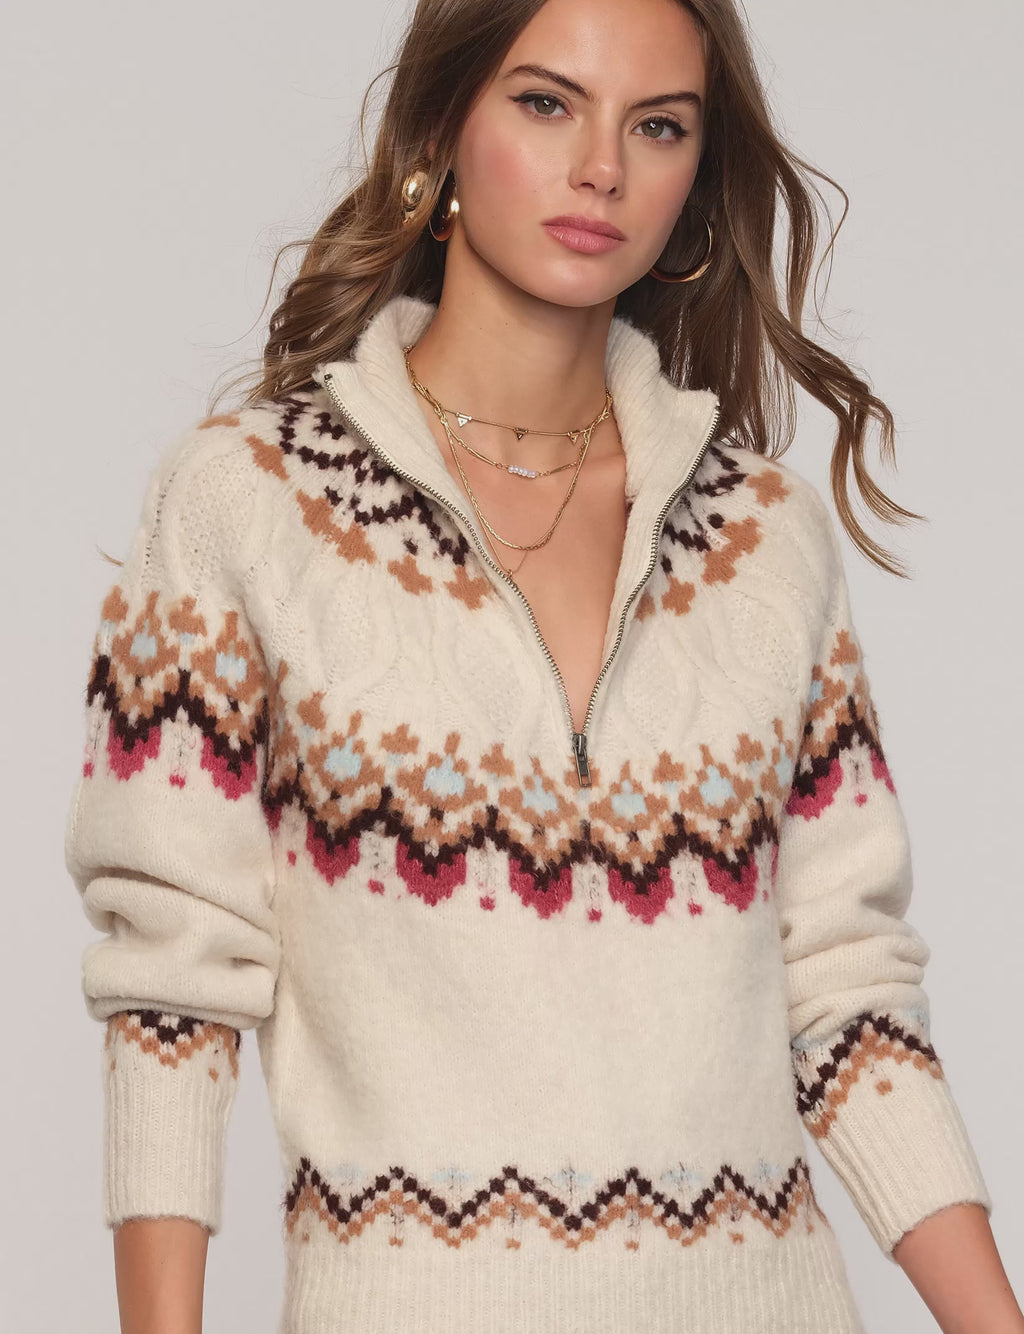 Bri Pointelle Knit Sweater in Ivory by Heartloom - Blooming Daily